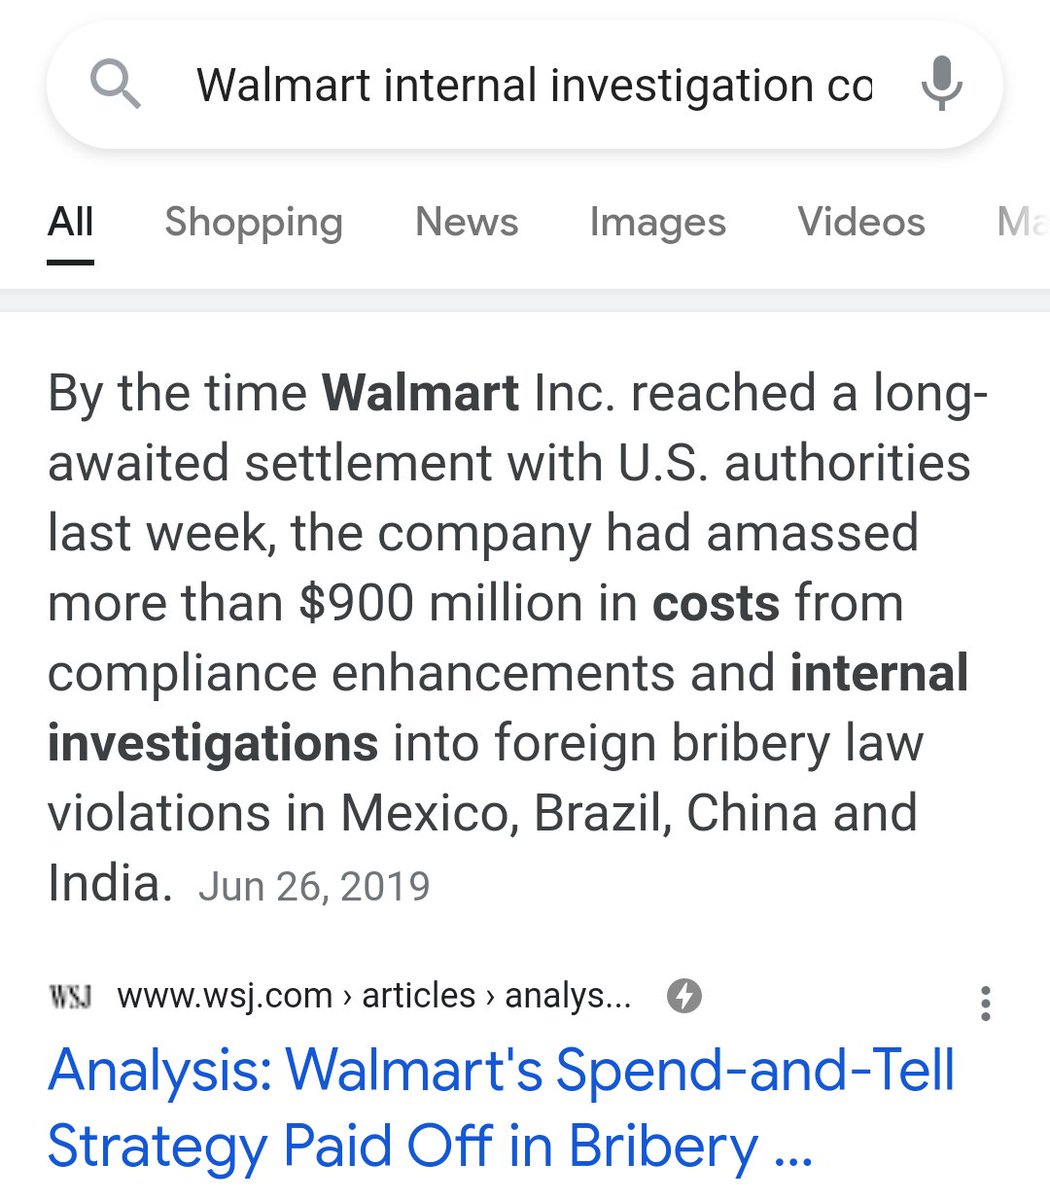 6/ Internal investigations of major corporations take years and often cost 100s of Millions of dollars, see example below. Comparing 2019 Global values, Walmart=$67B, Nike=$32B. Two high-profile attorneys could easily exceed $20M. Boies Schiller would not have done it for less.